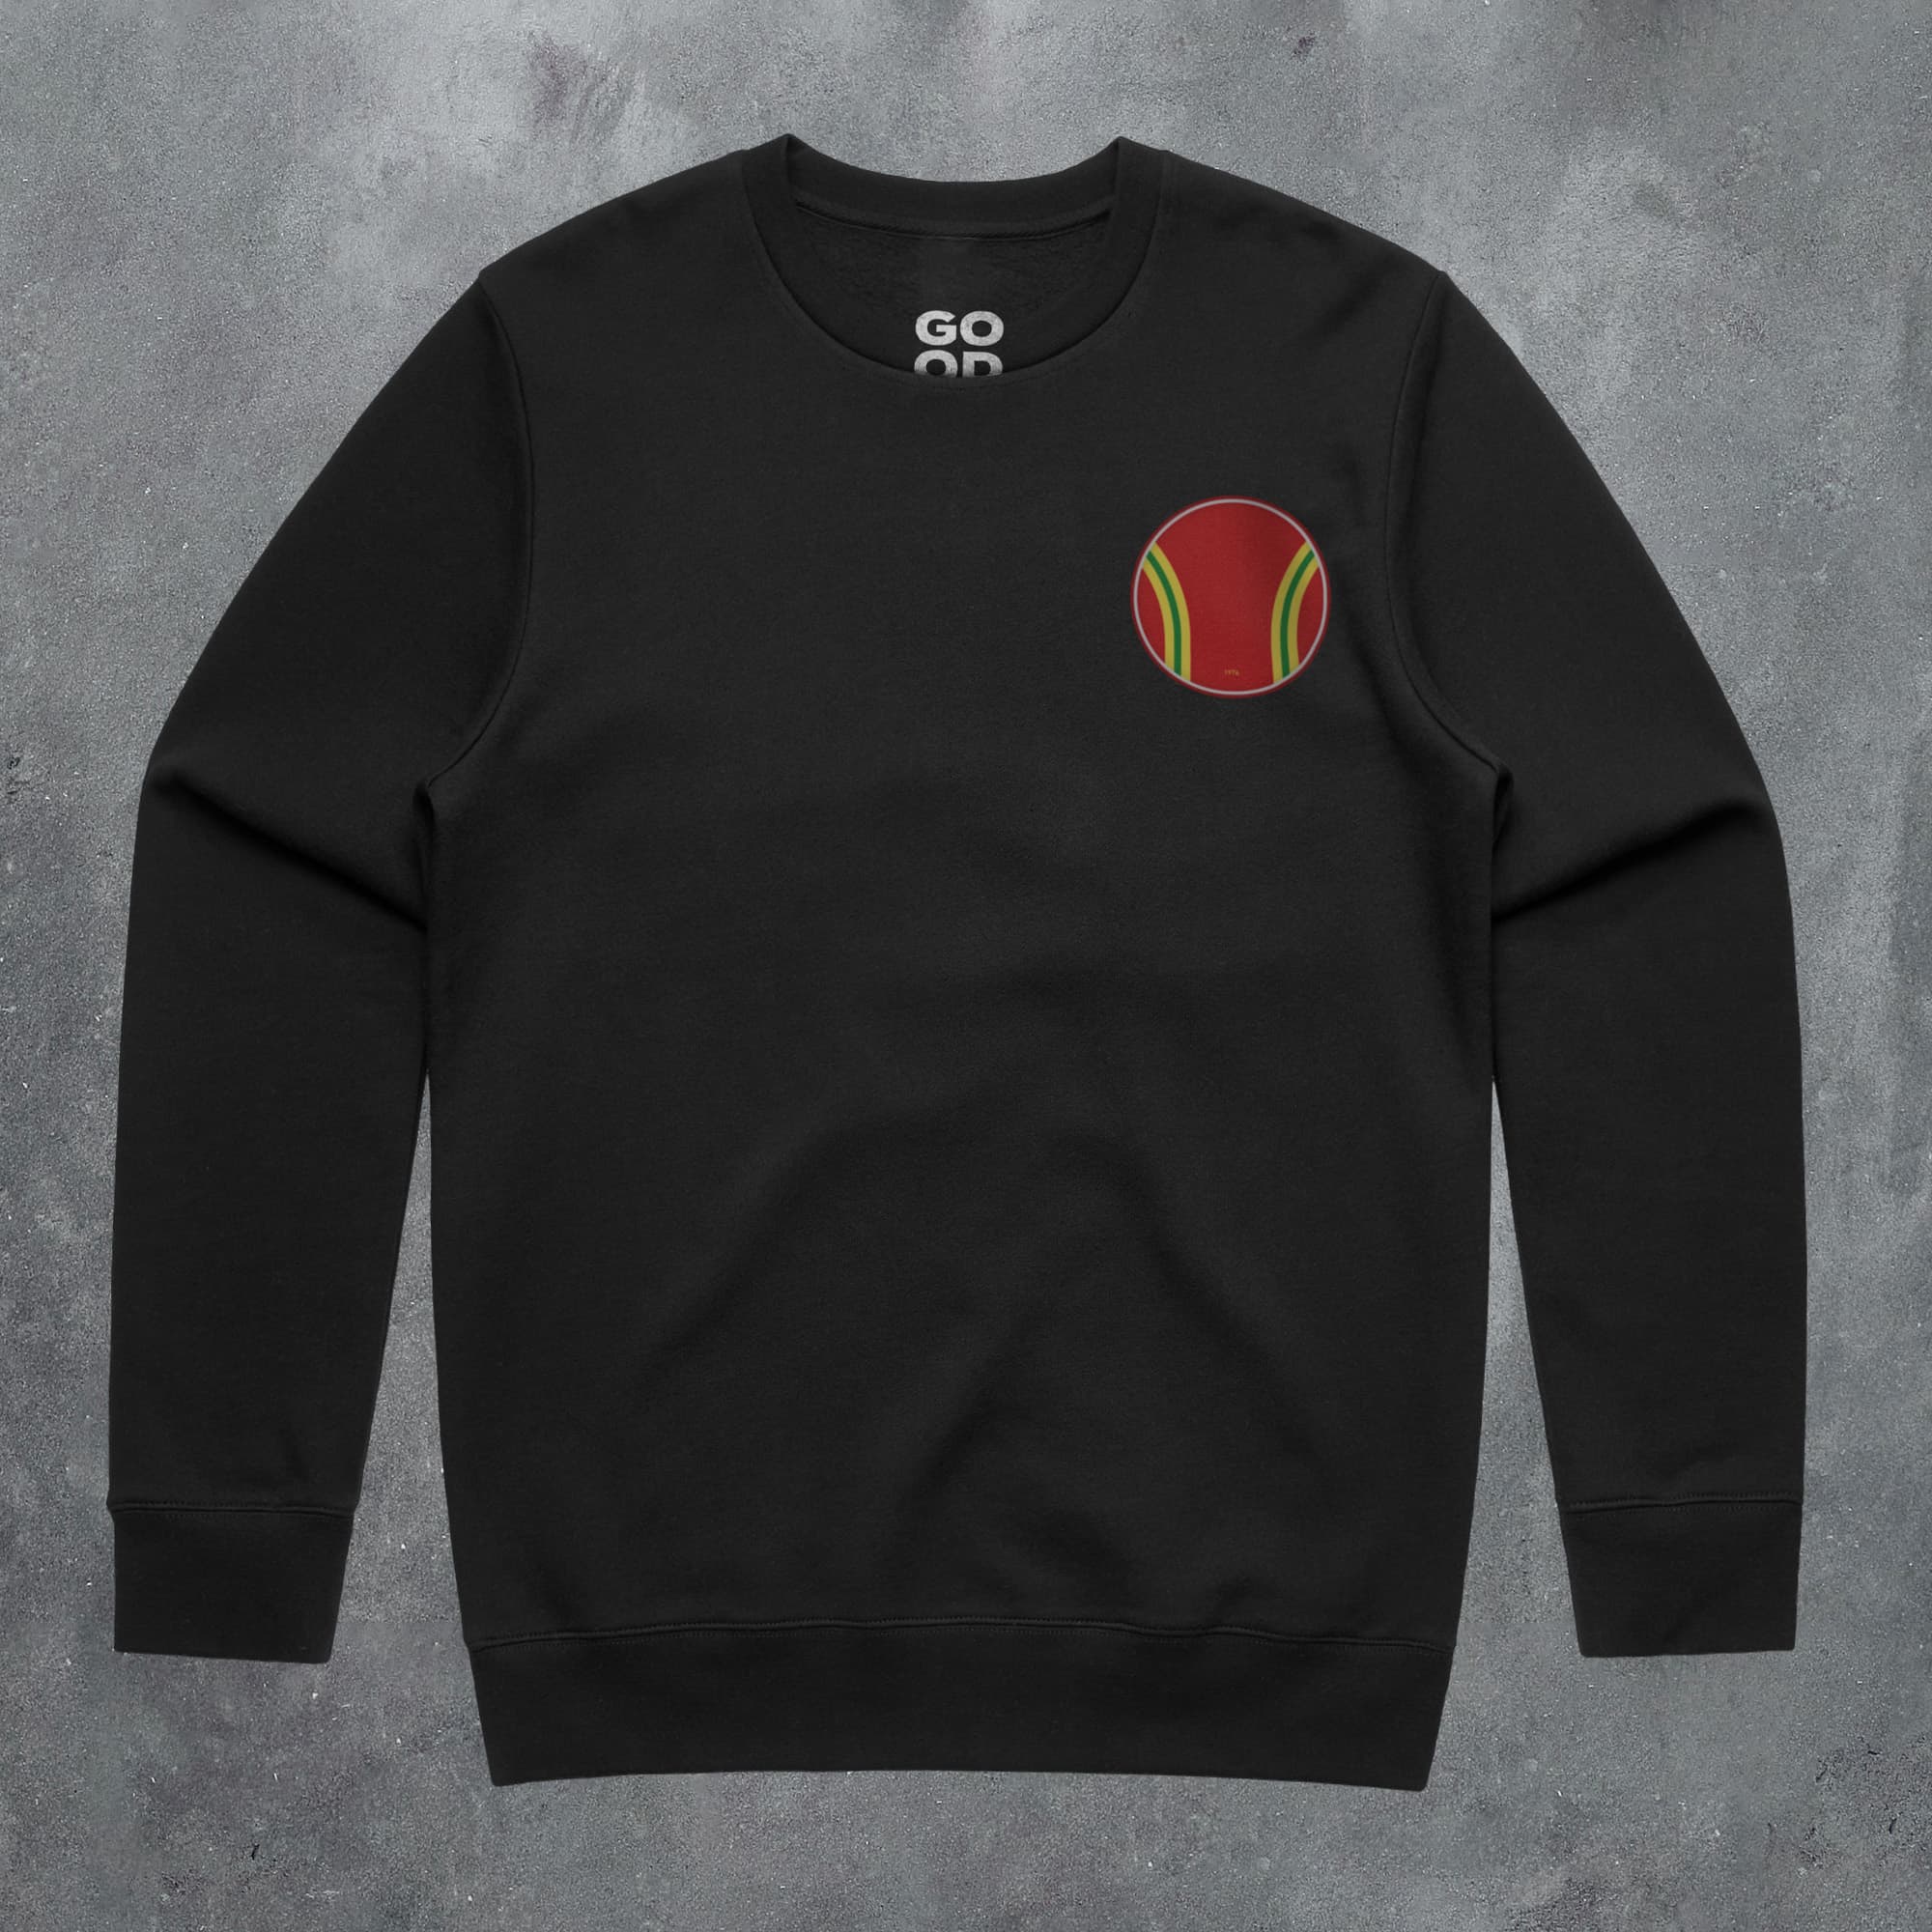 a black sweatshirt with a tennis ball embroidered on it